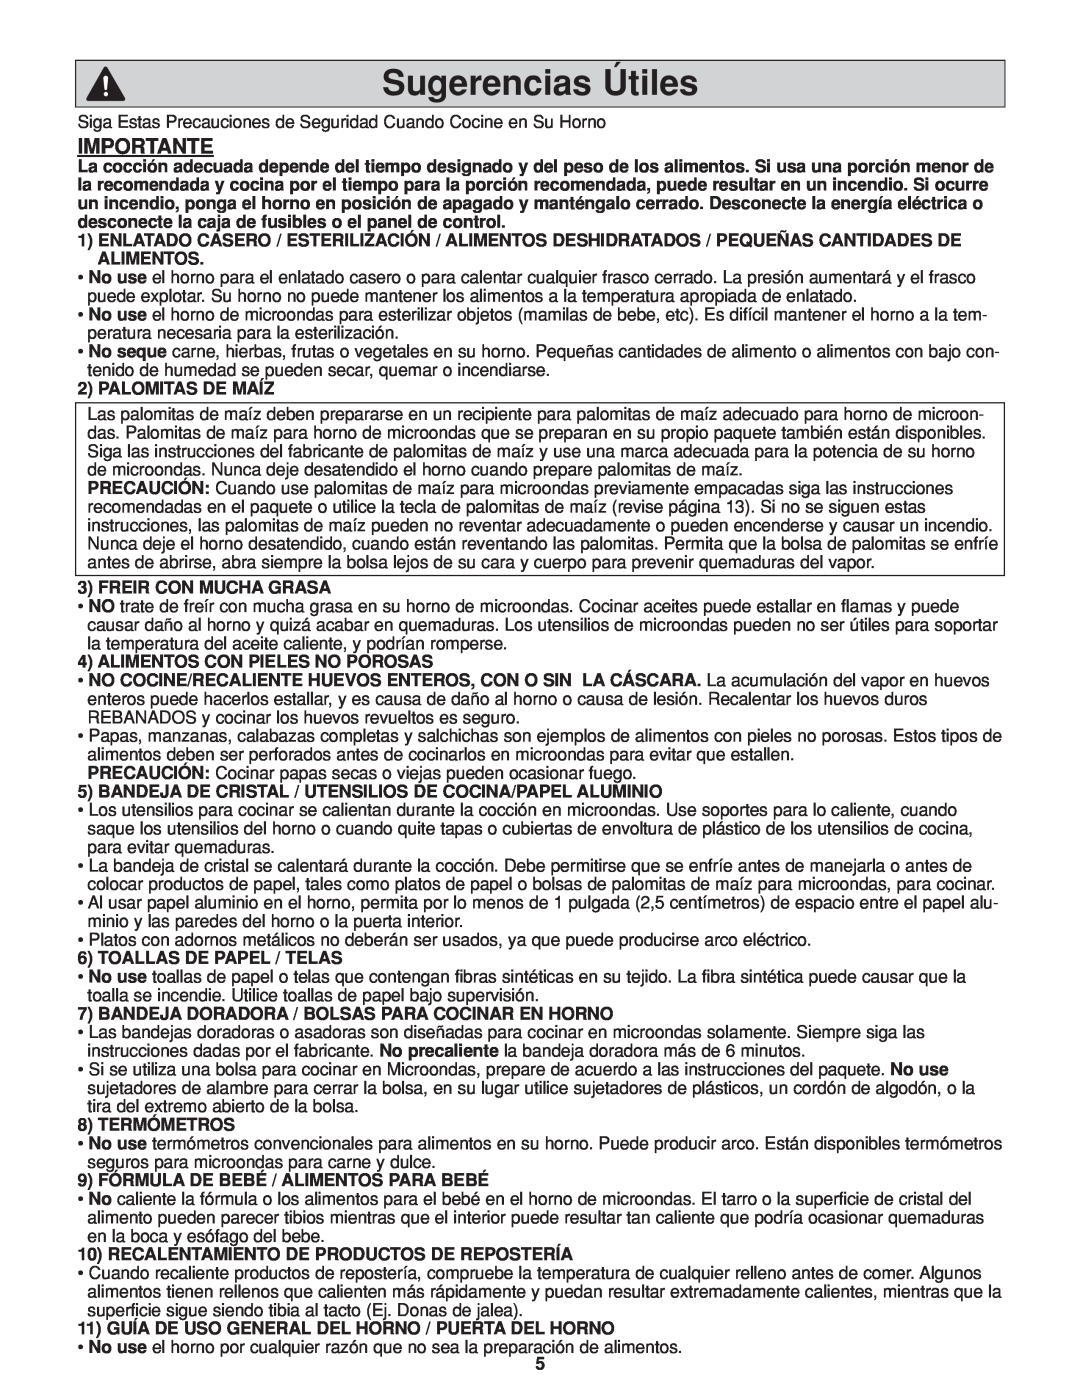 Panasonic NN-H264 important safety instructions Sugerencias Útiles, Importante 